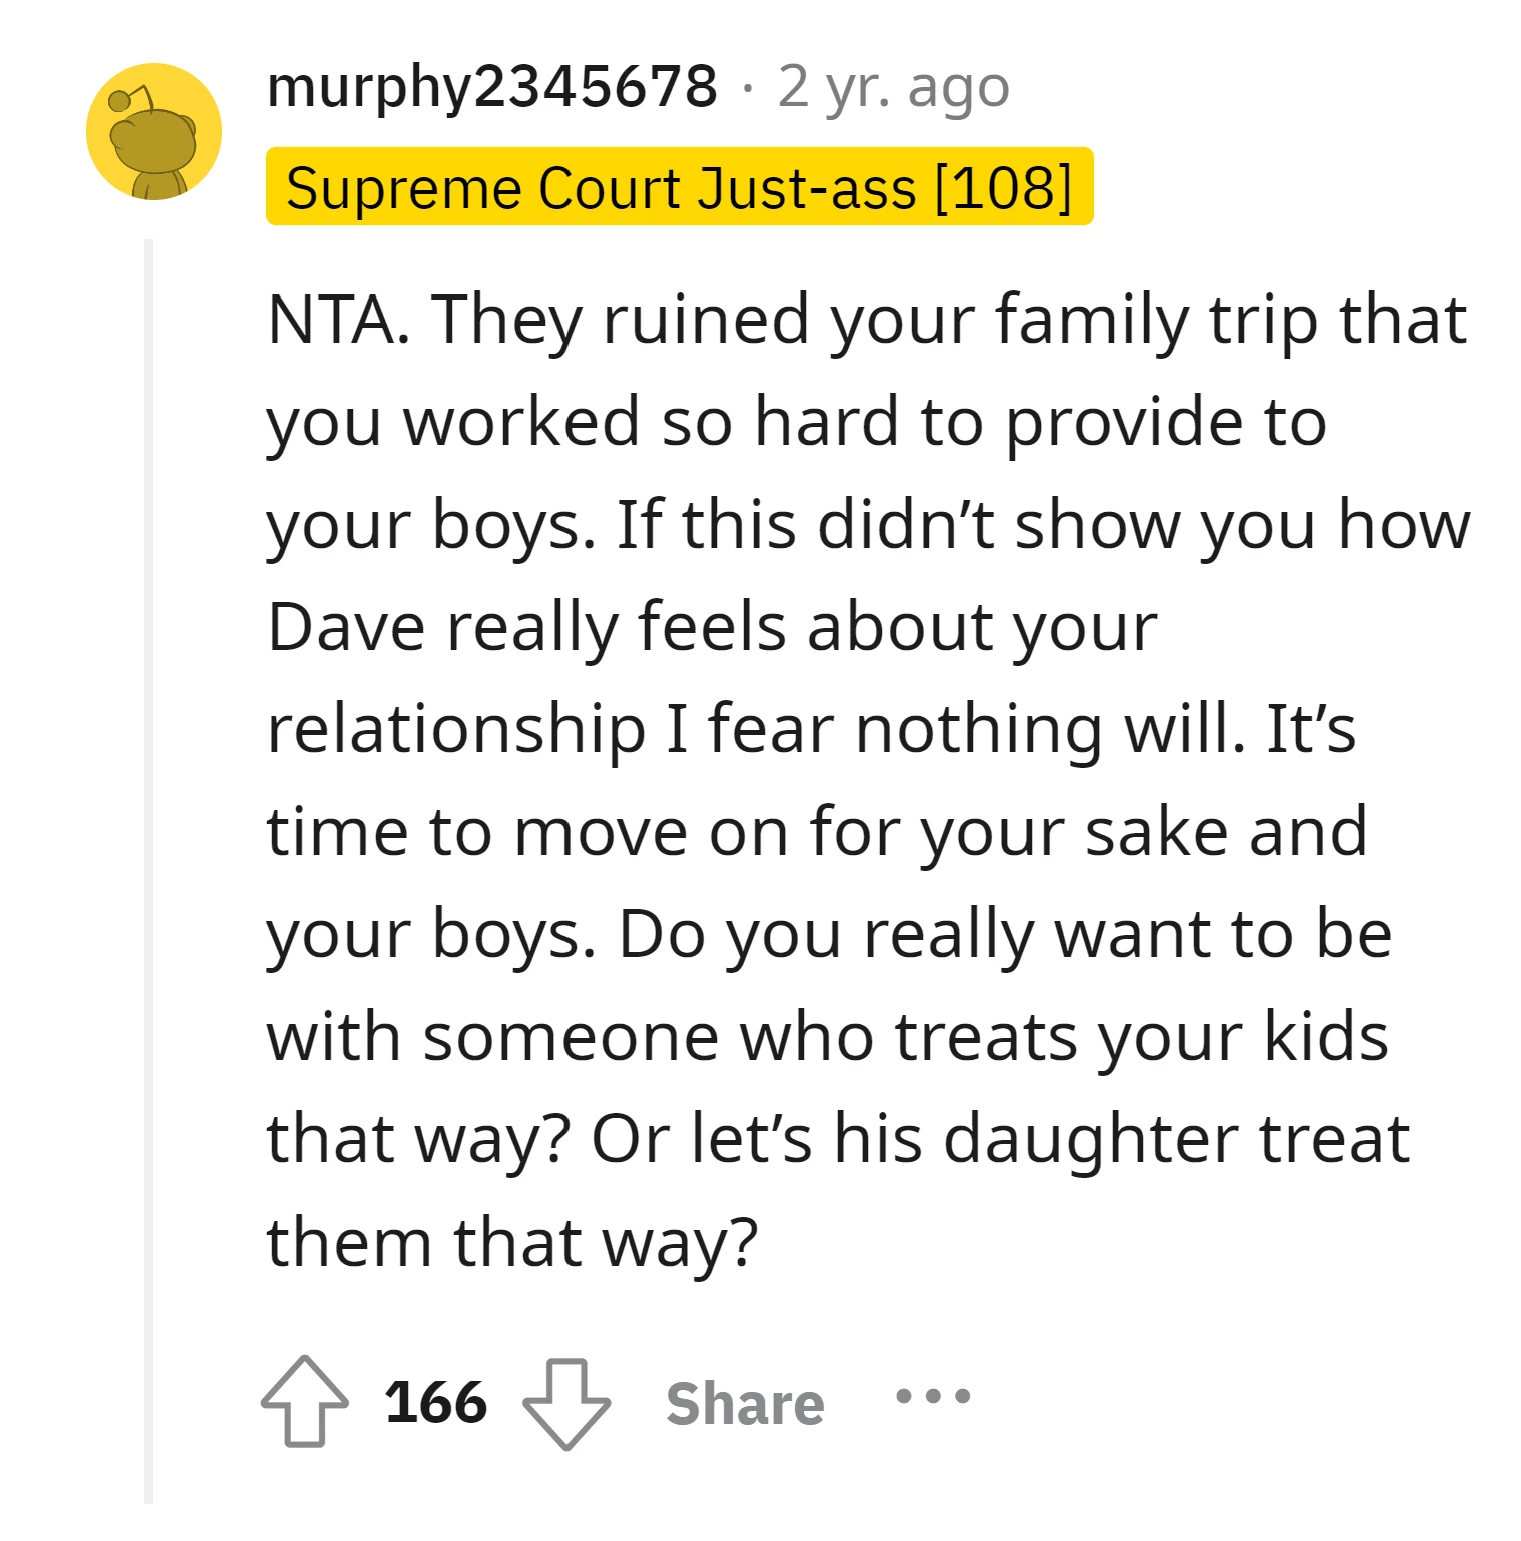 Dave Could Have A Bad Influence On Your Children, OP!